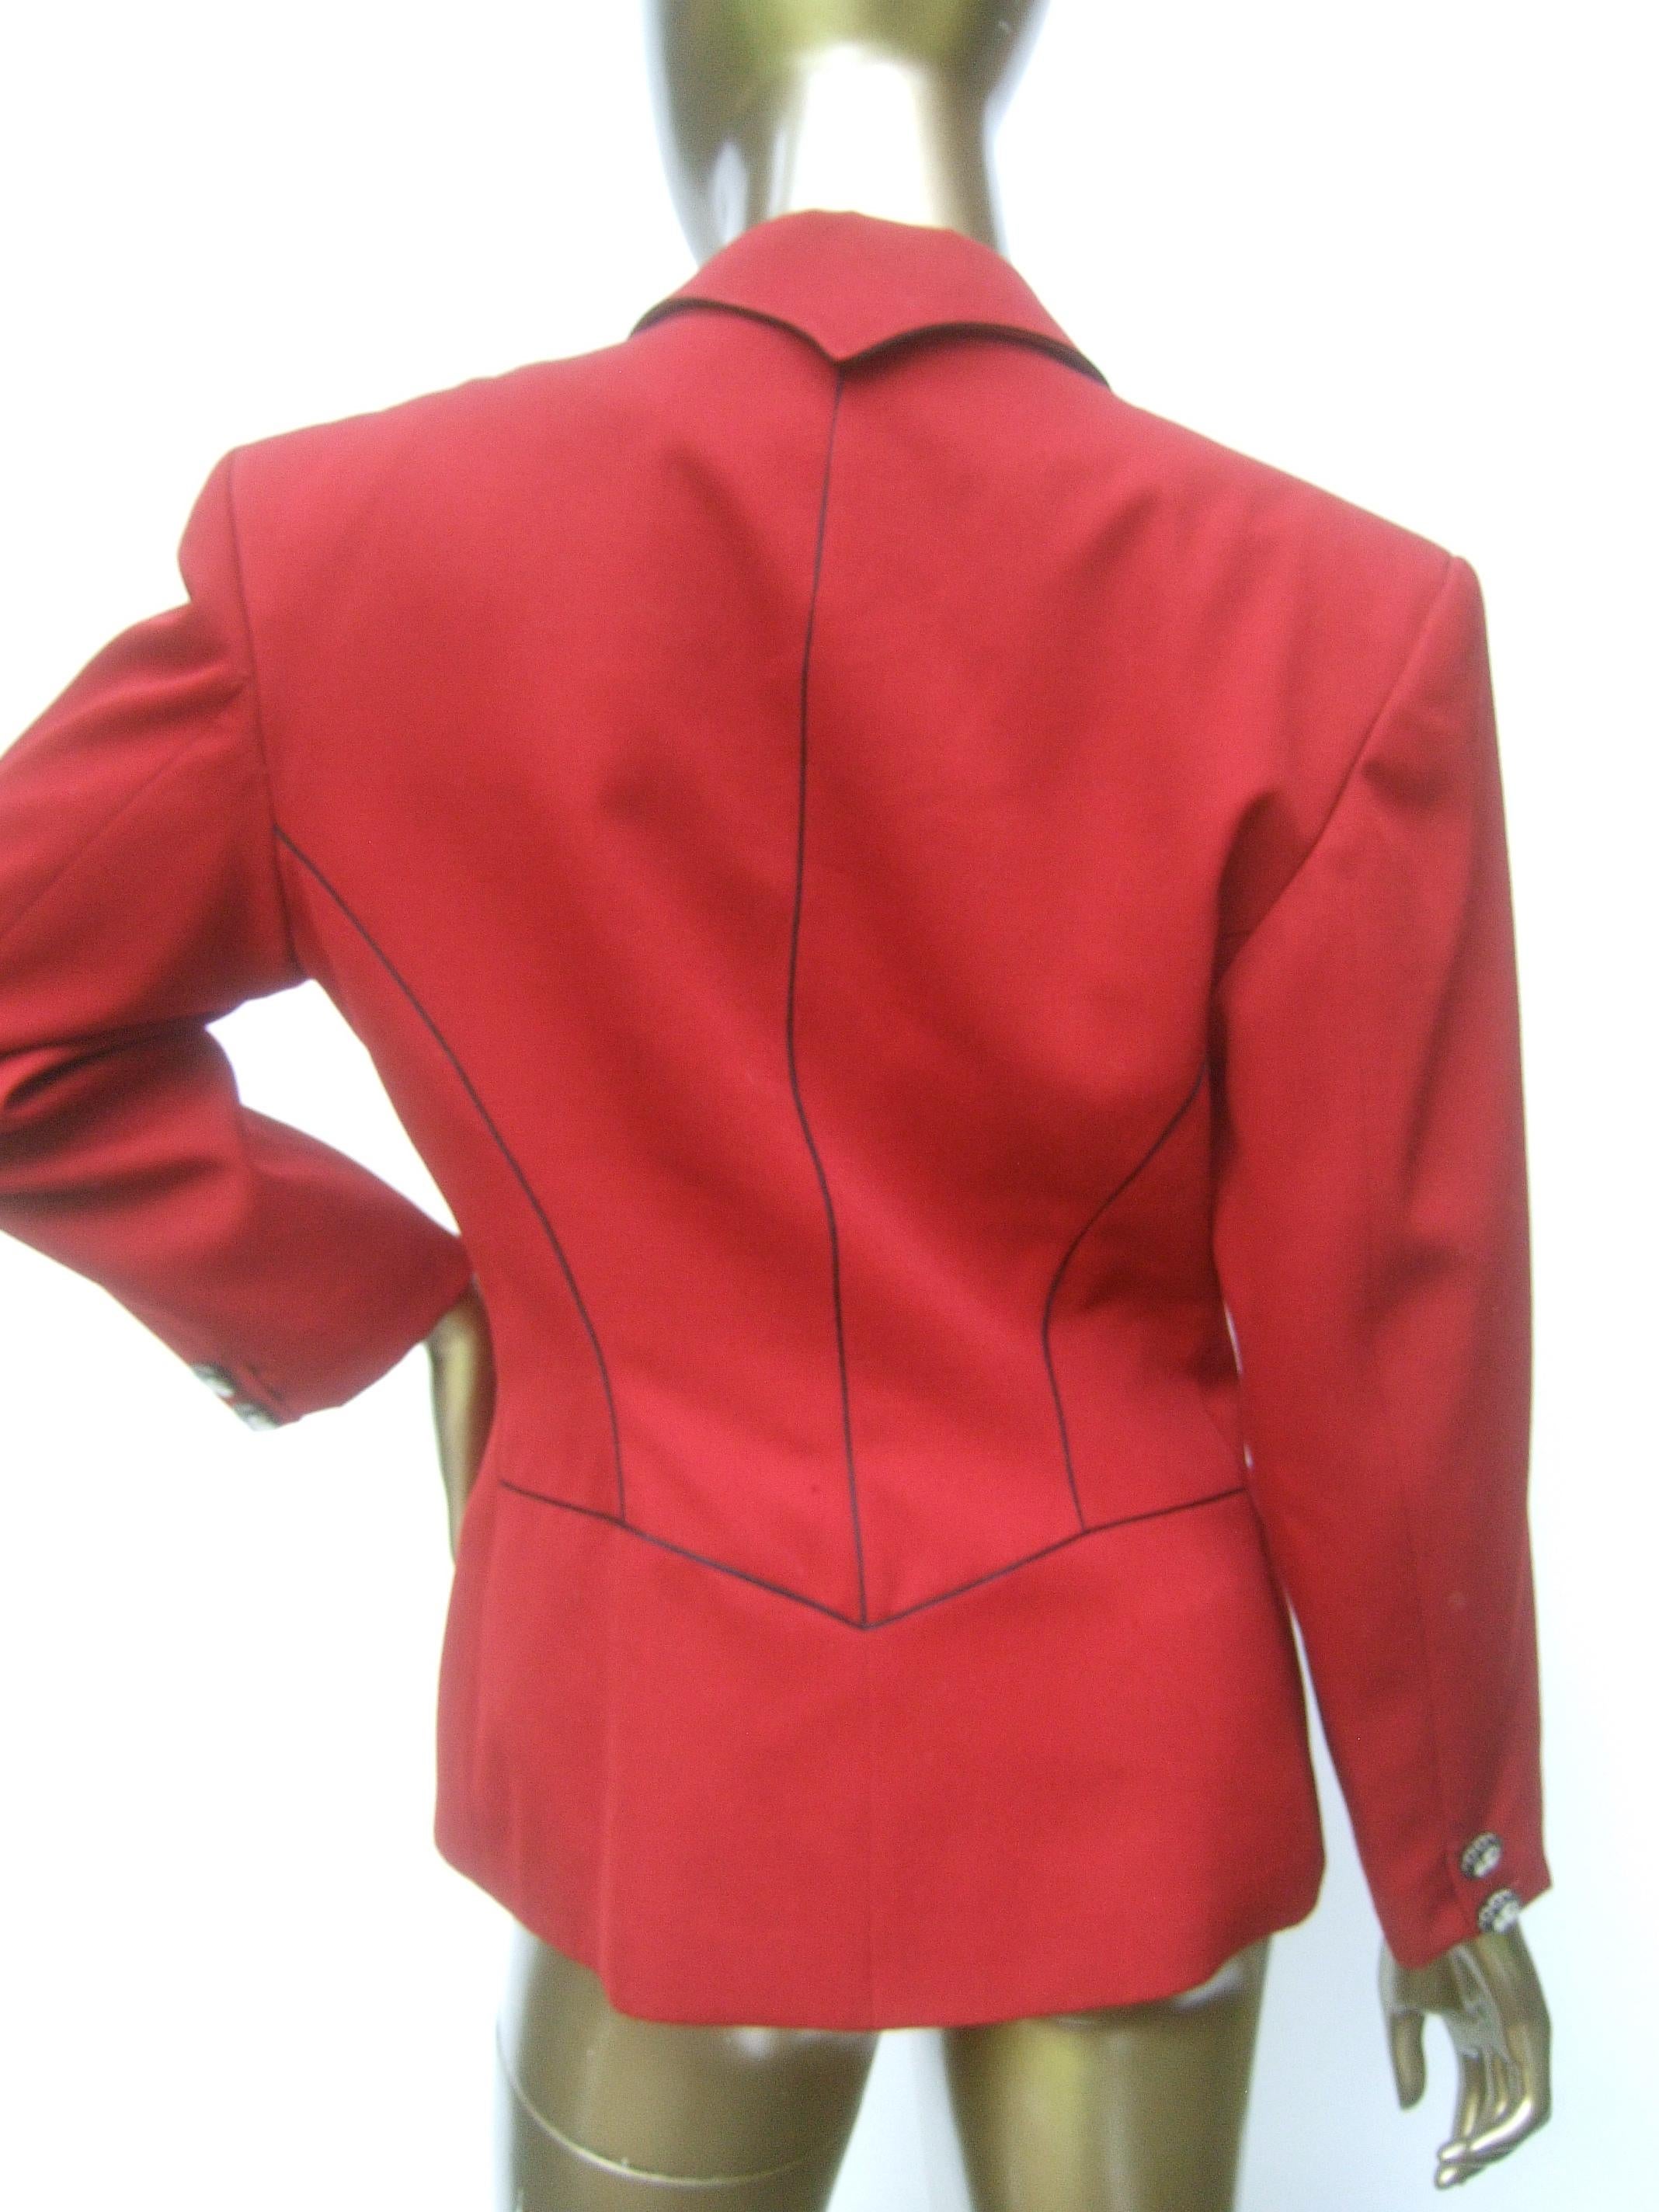 Lolita Lempicka Paris Red Wool Face Button Double-Breasted Blazer c 1980s For Sale 6